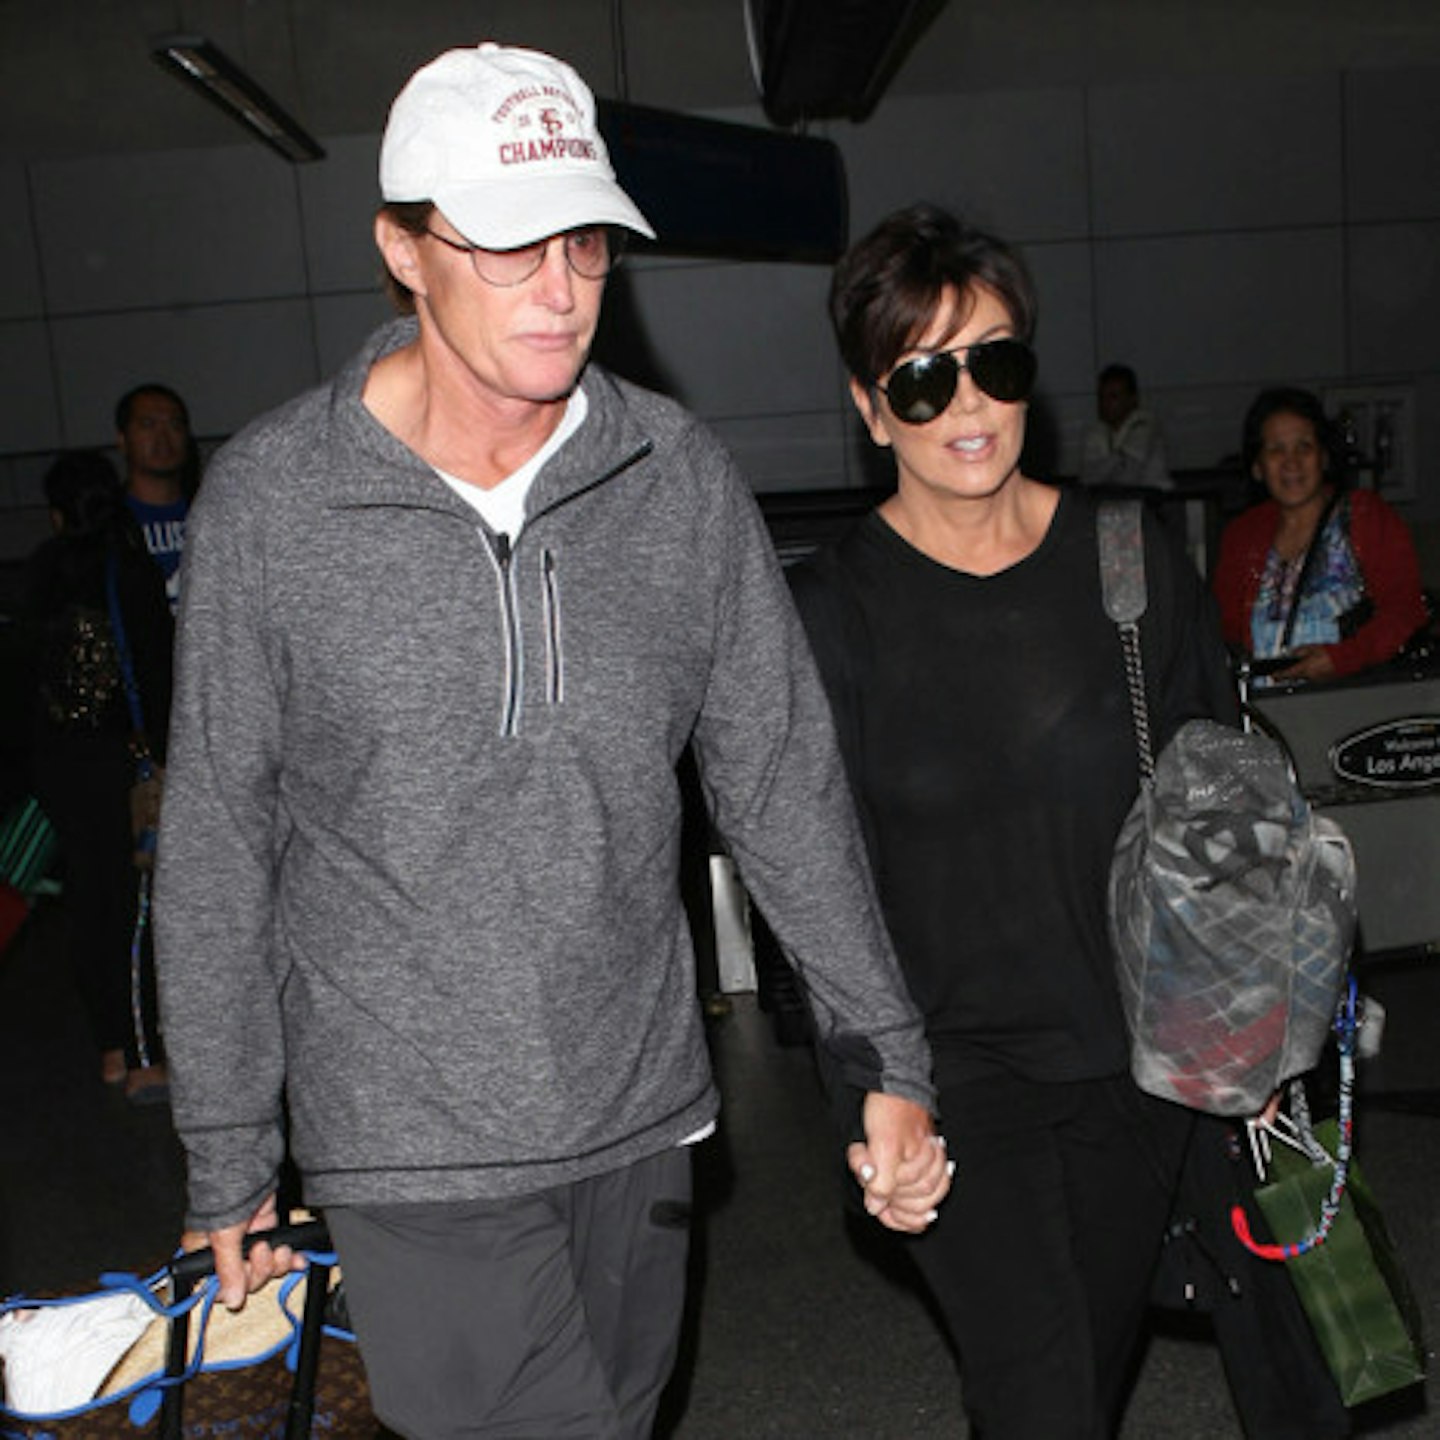 Bruce is set to be upset with his estranged wife over their daughter's globetrotting